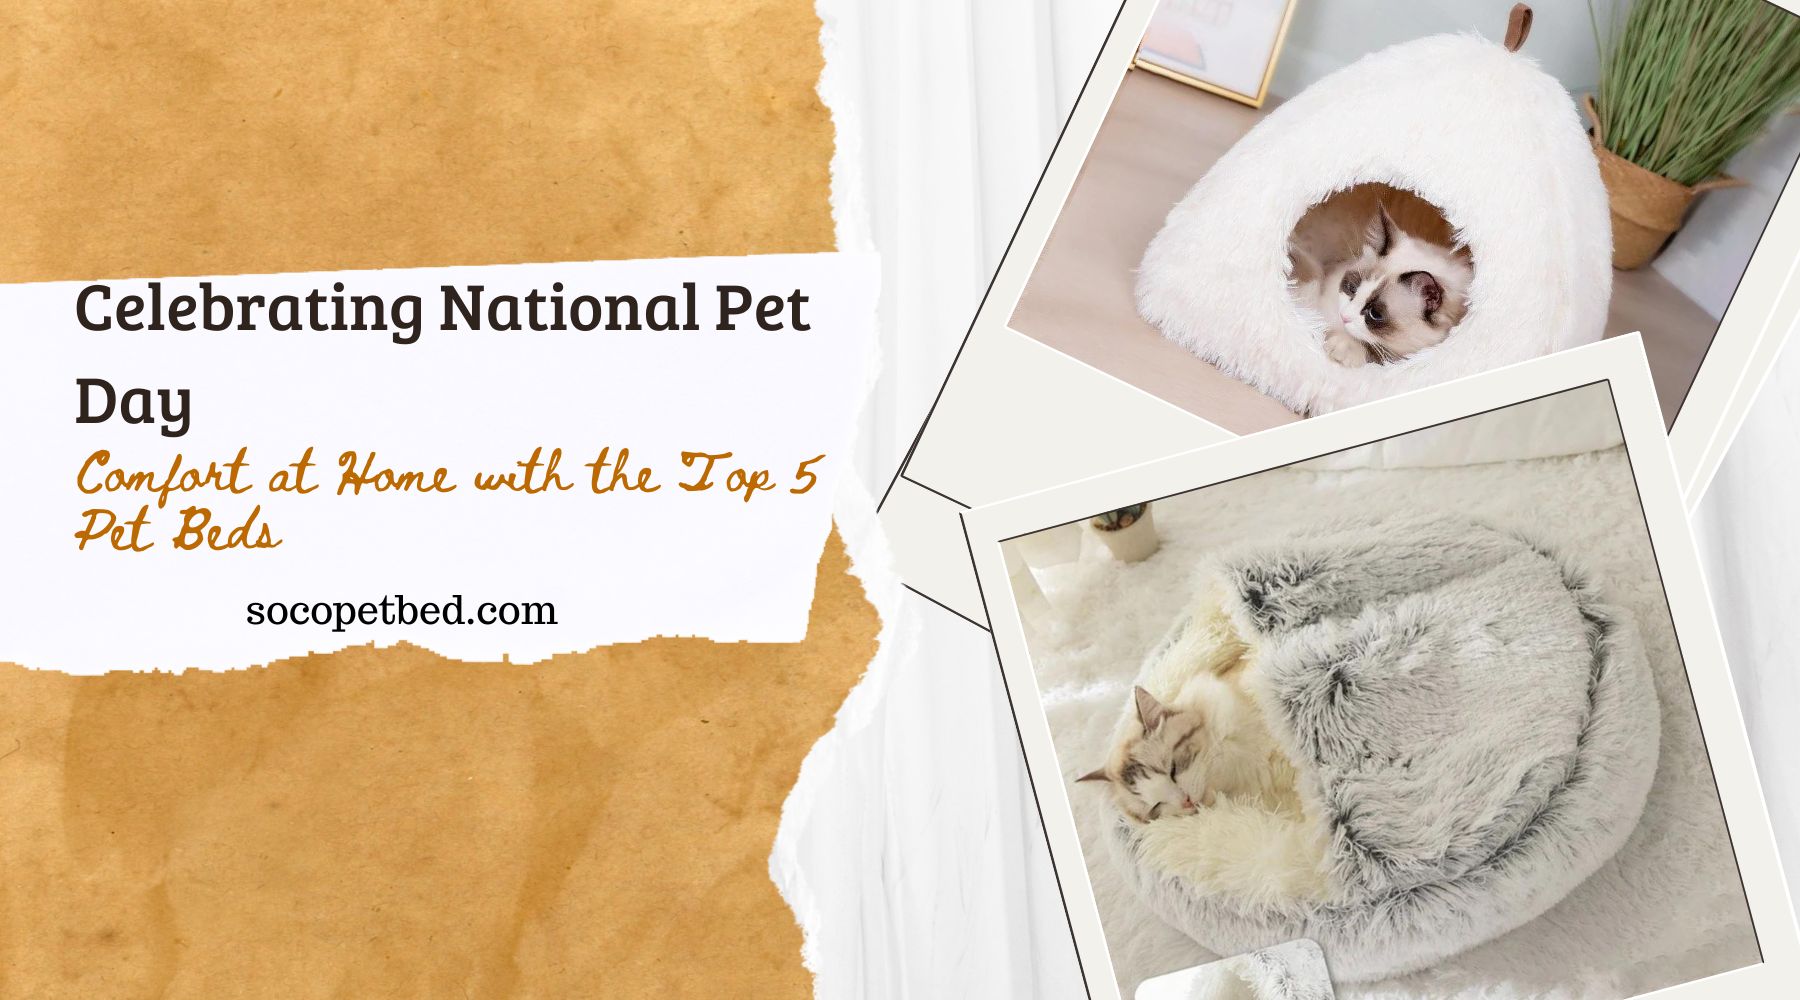 Celebrating National Pet Day: Comfort at Home with the Top 5 Pet Beds